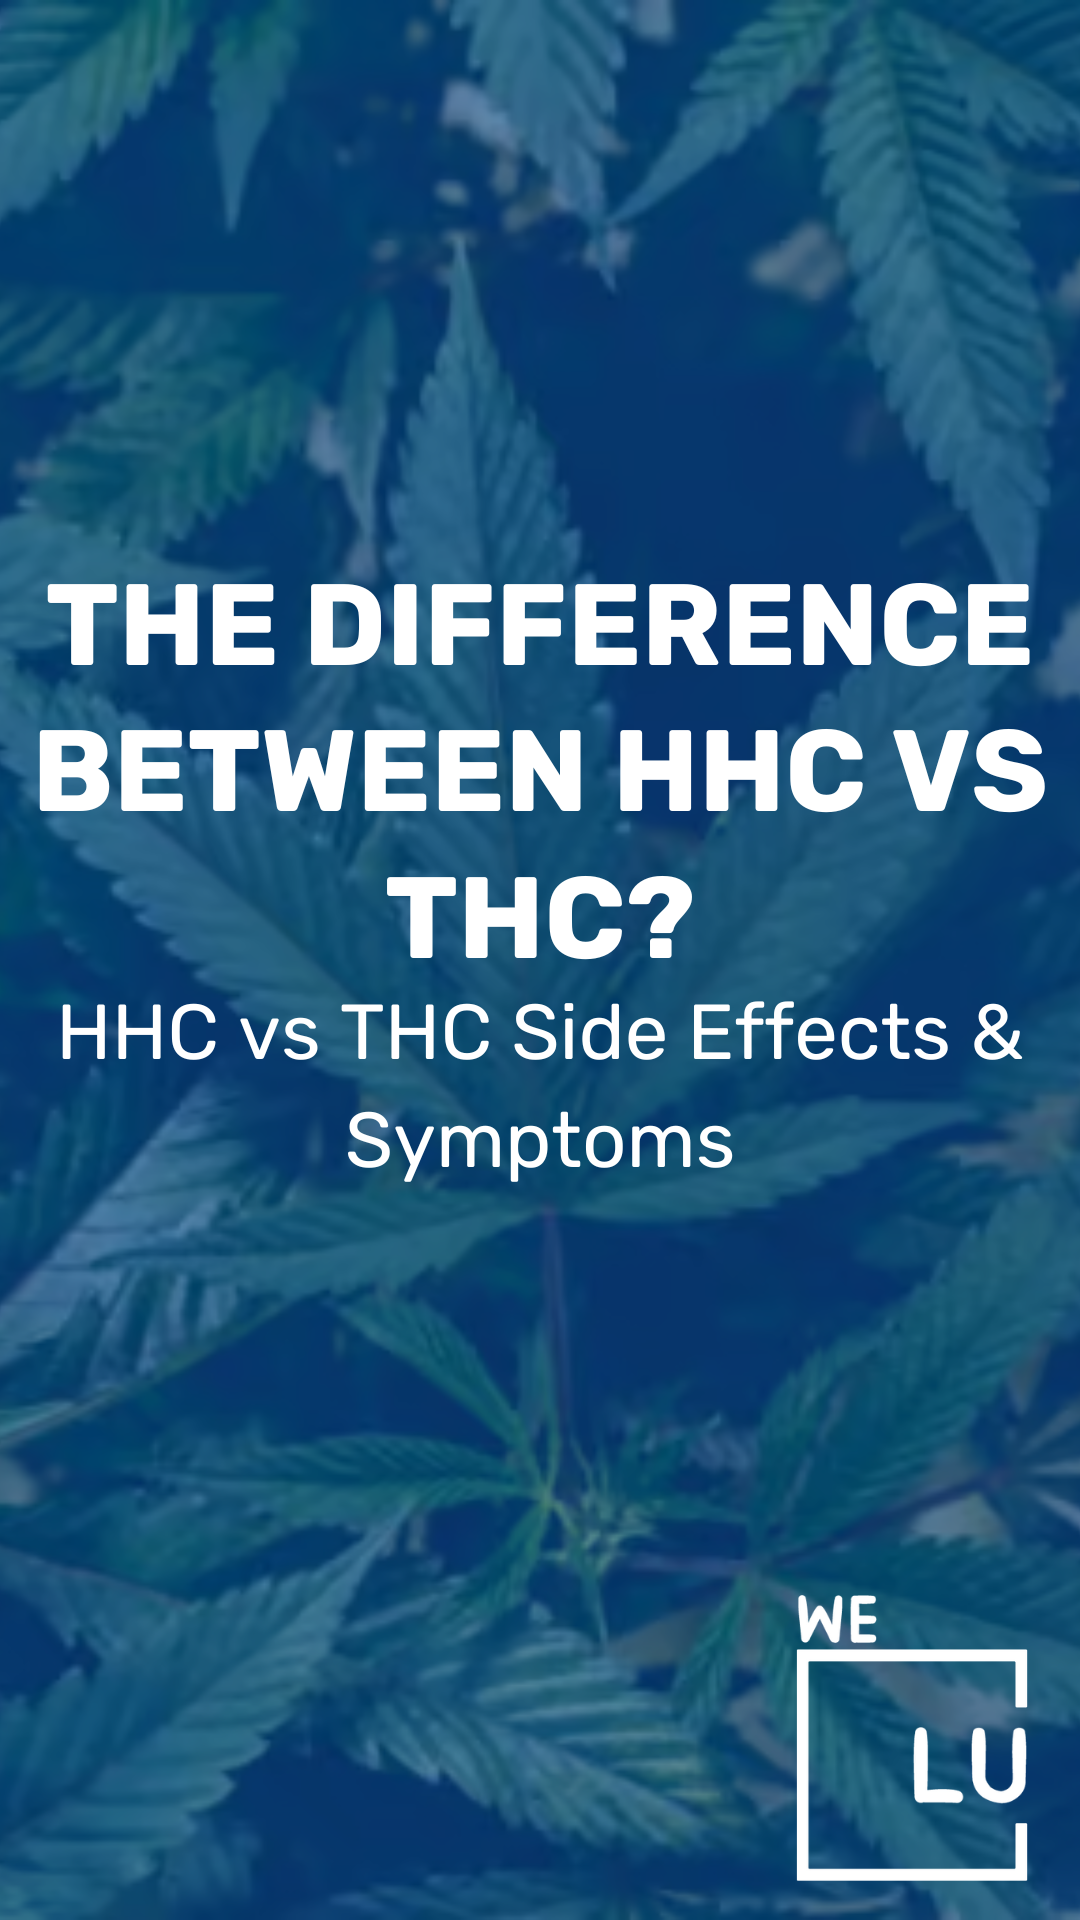 HHC Vs THC are both cannabinoids and chemical compounds in the cannabis plant. They are part of a group of over 100 different cannabinoids identified in cannabis, each with its unique effects and potential benefits.